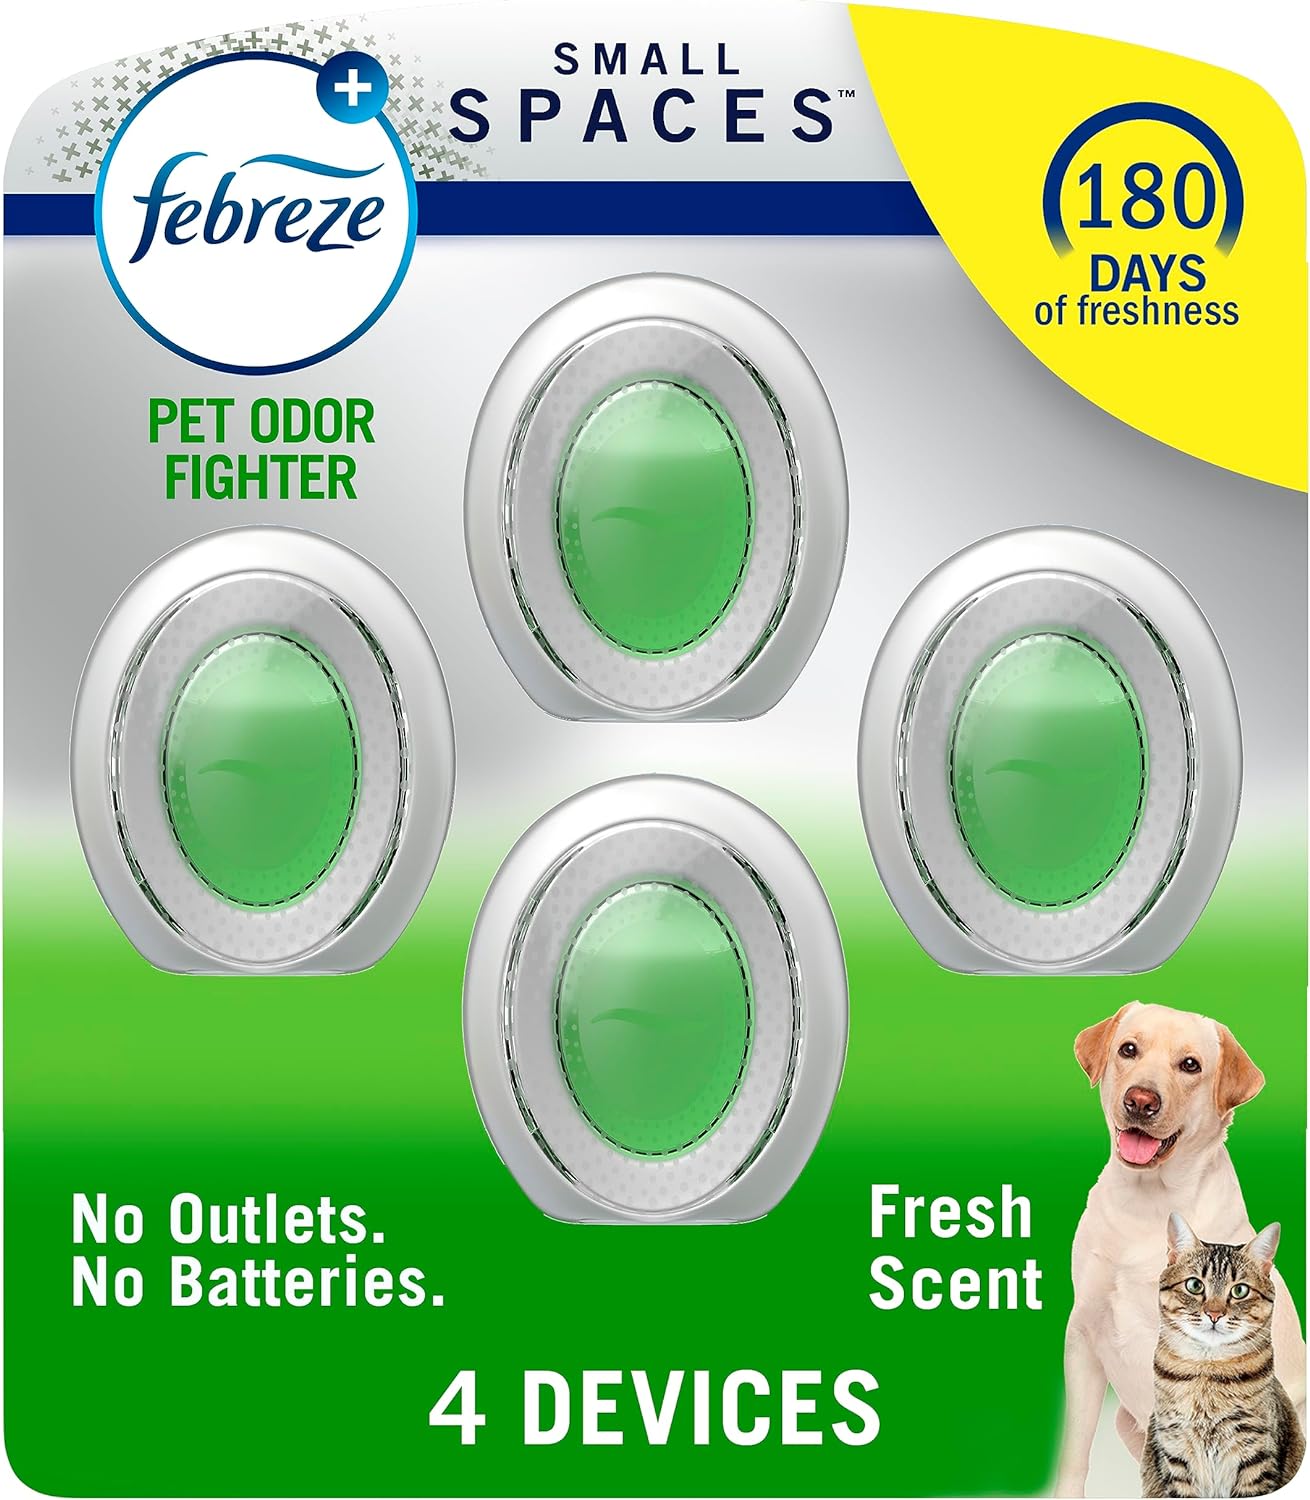 Febreze Small Spaces Air Freshener Heavy Duty Pet Odor Fighter, 25 fl. oz., Pack of 4